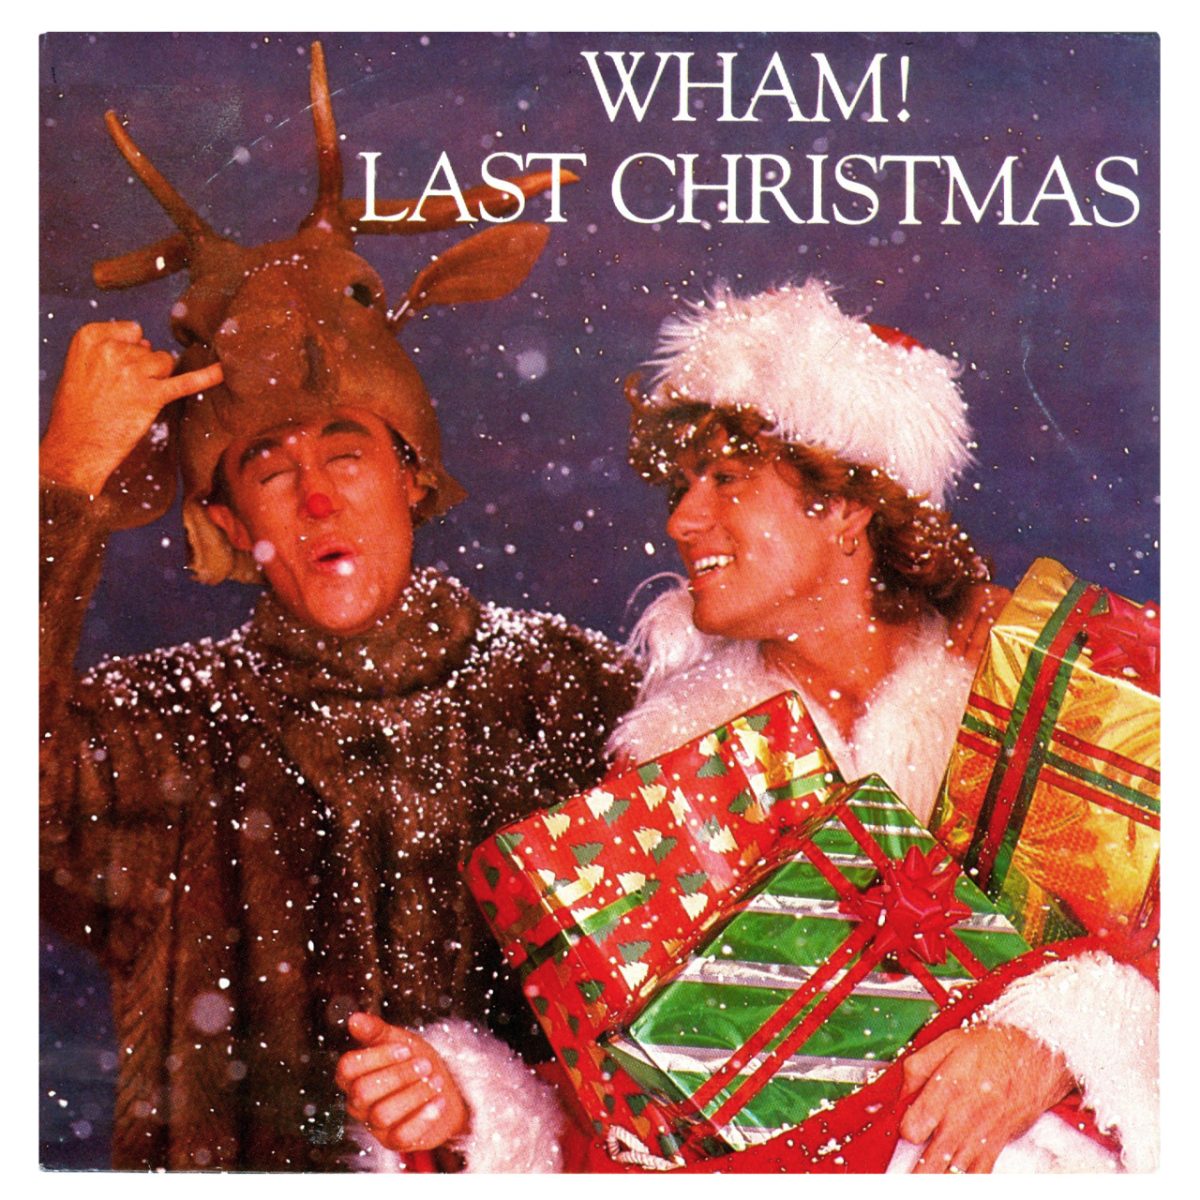 The cover of Last Christmas by Wham!.